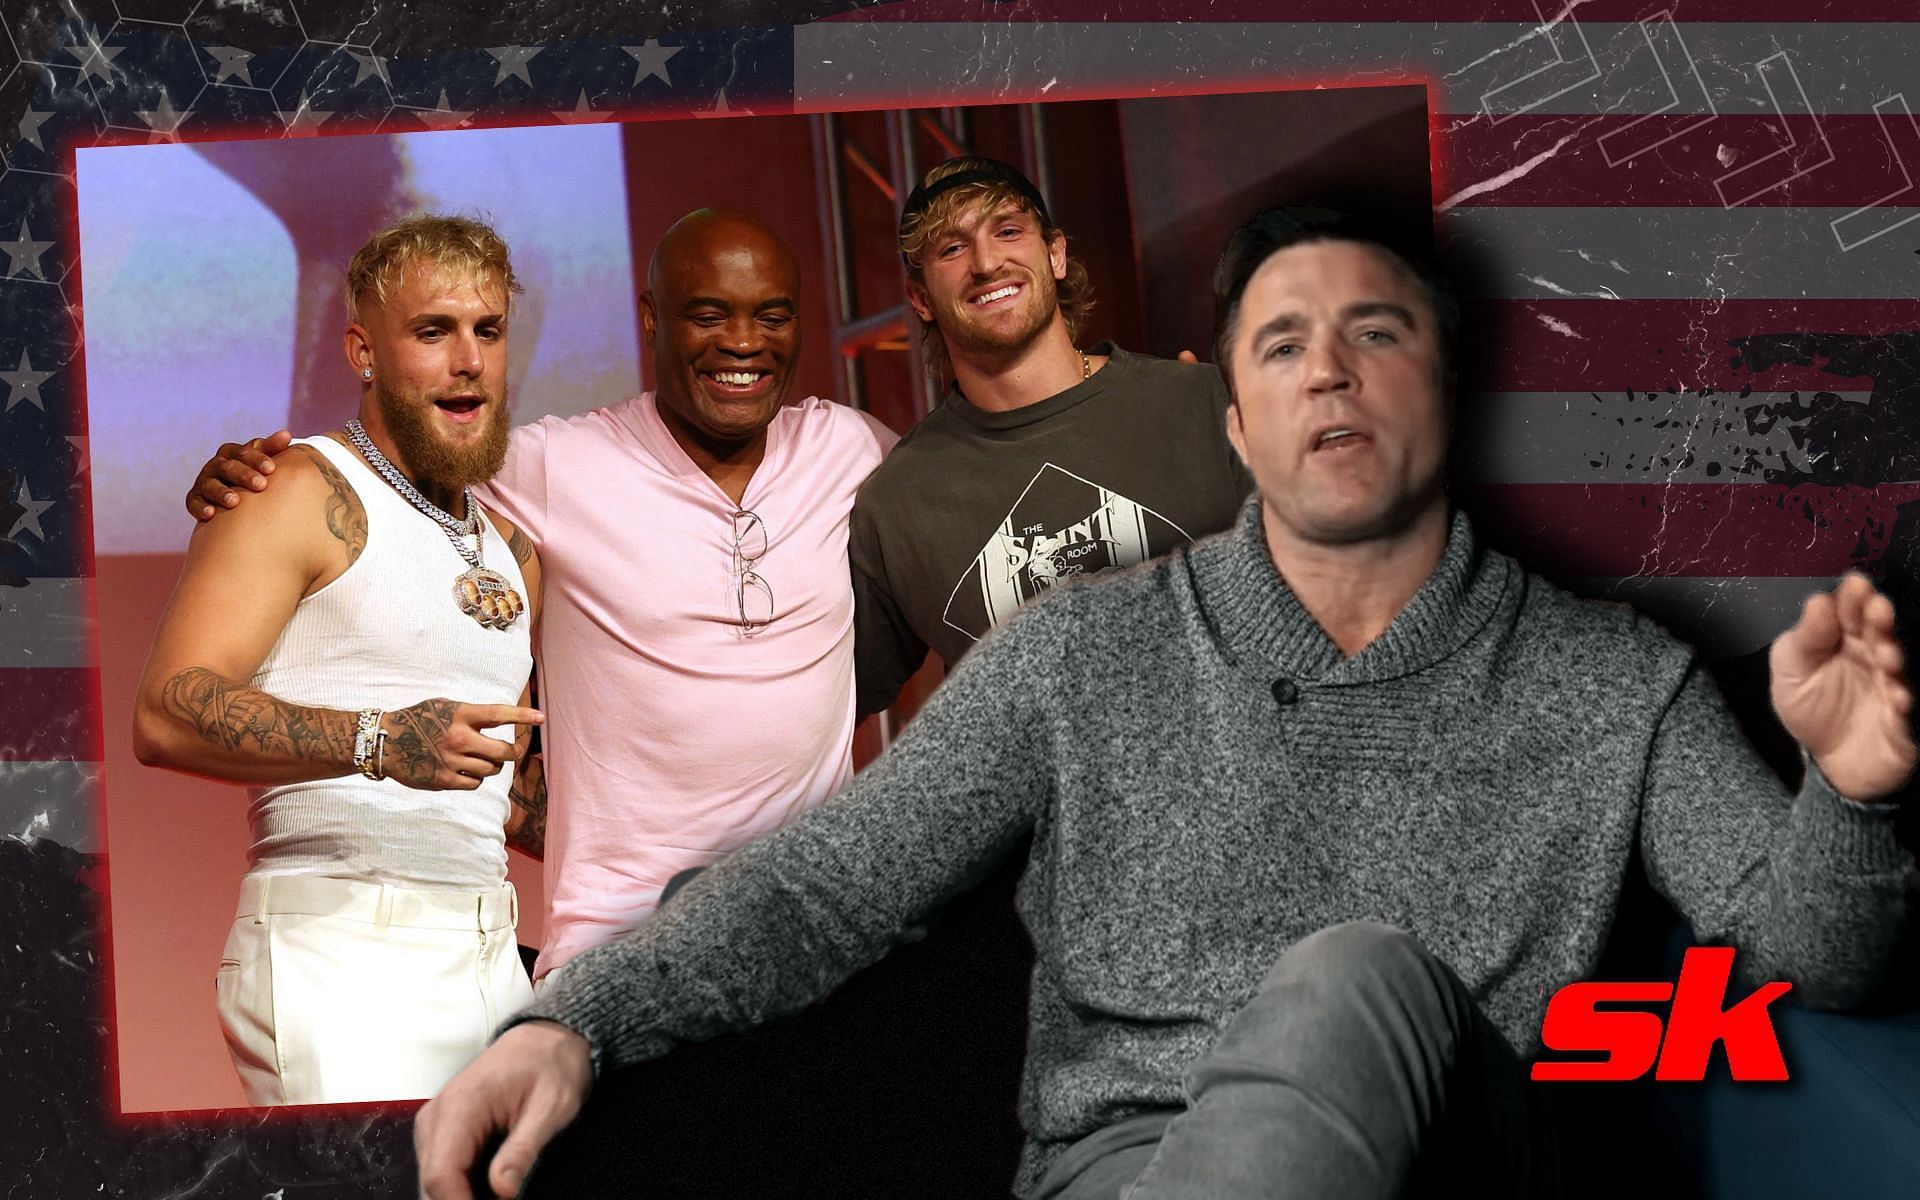 Chael Sonnen says Jake Paul and Logan Paul deserve credit. [Image credit: YouTube/ChaelSonnen; Getty Images.]